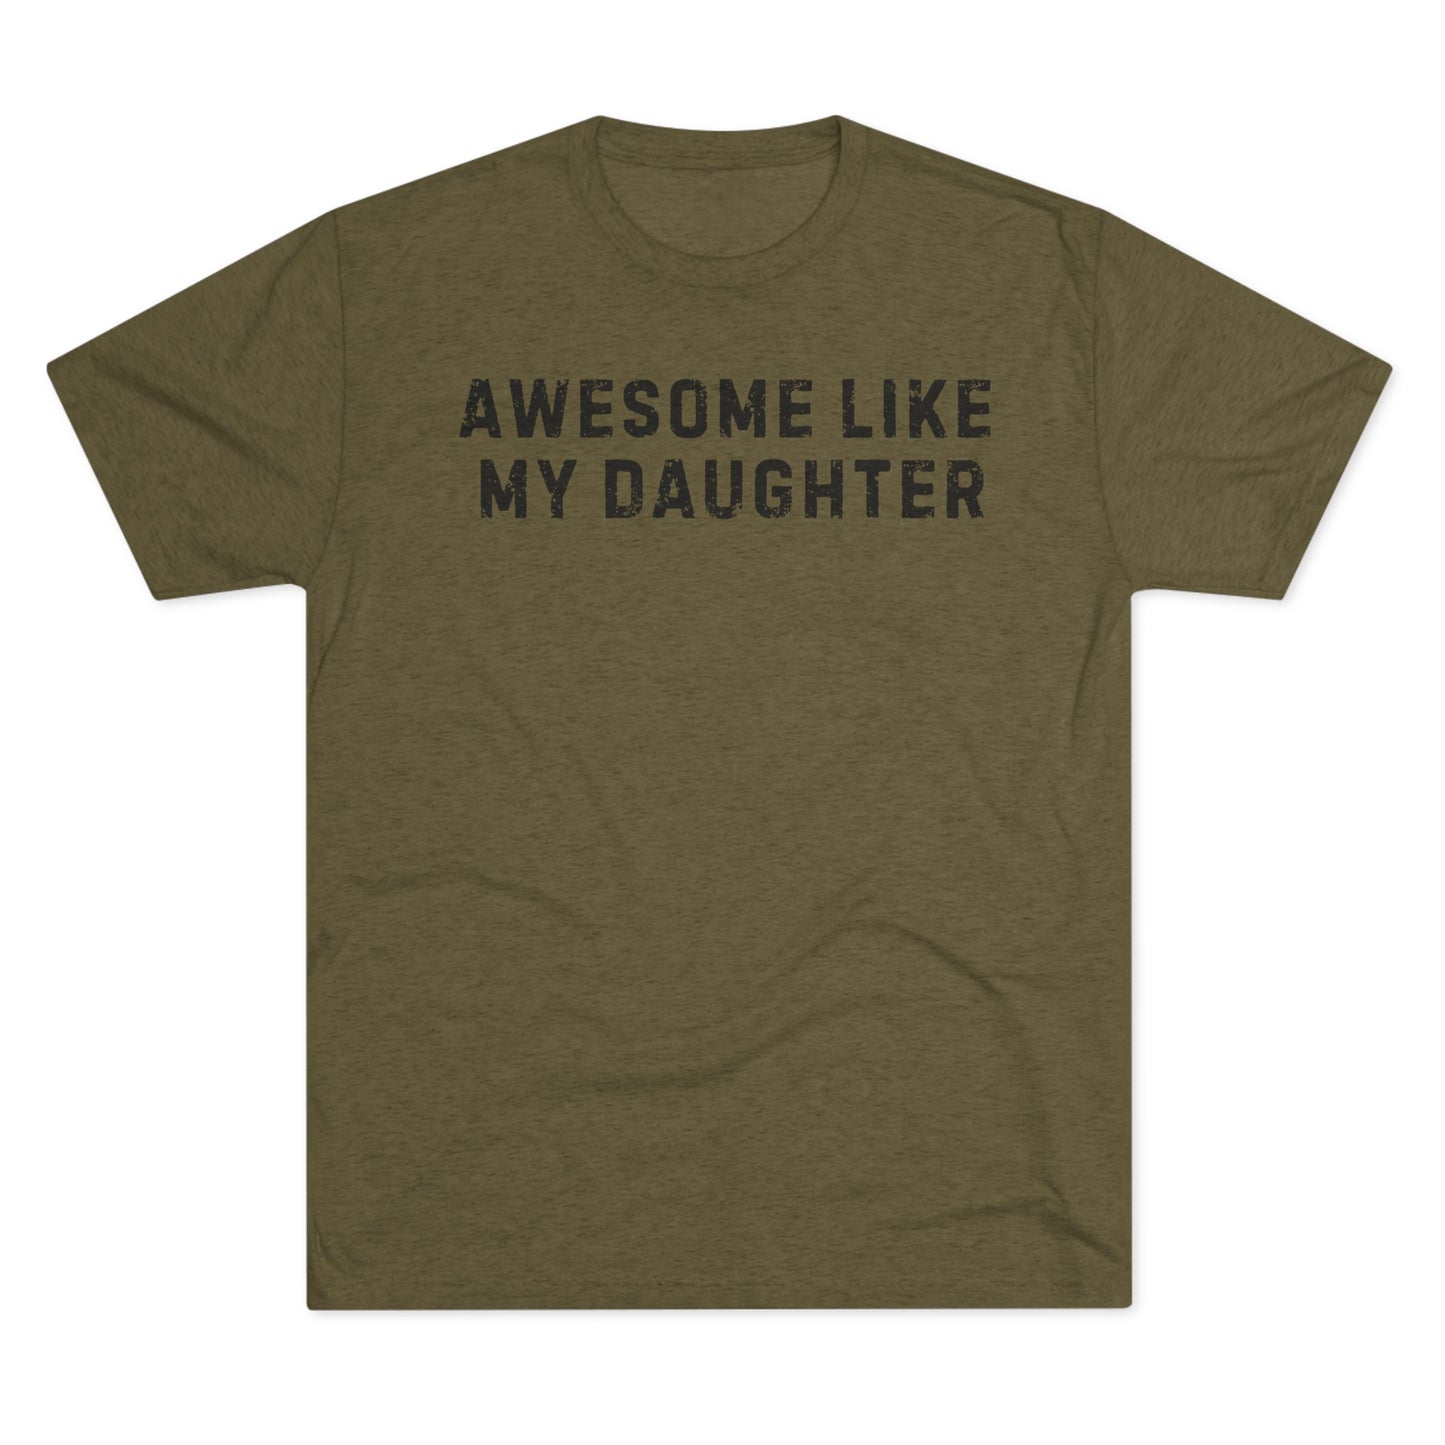 Awesome Like My Daughter T-Shirt - Ultra-Soft Tri-Blend, Regular Fit for Ultimate Comfort